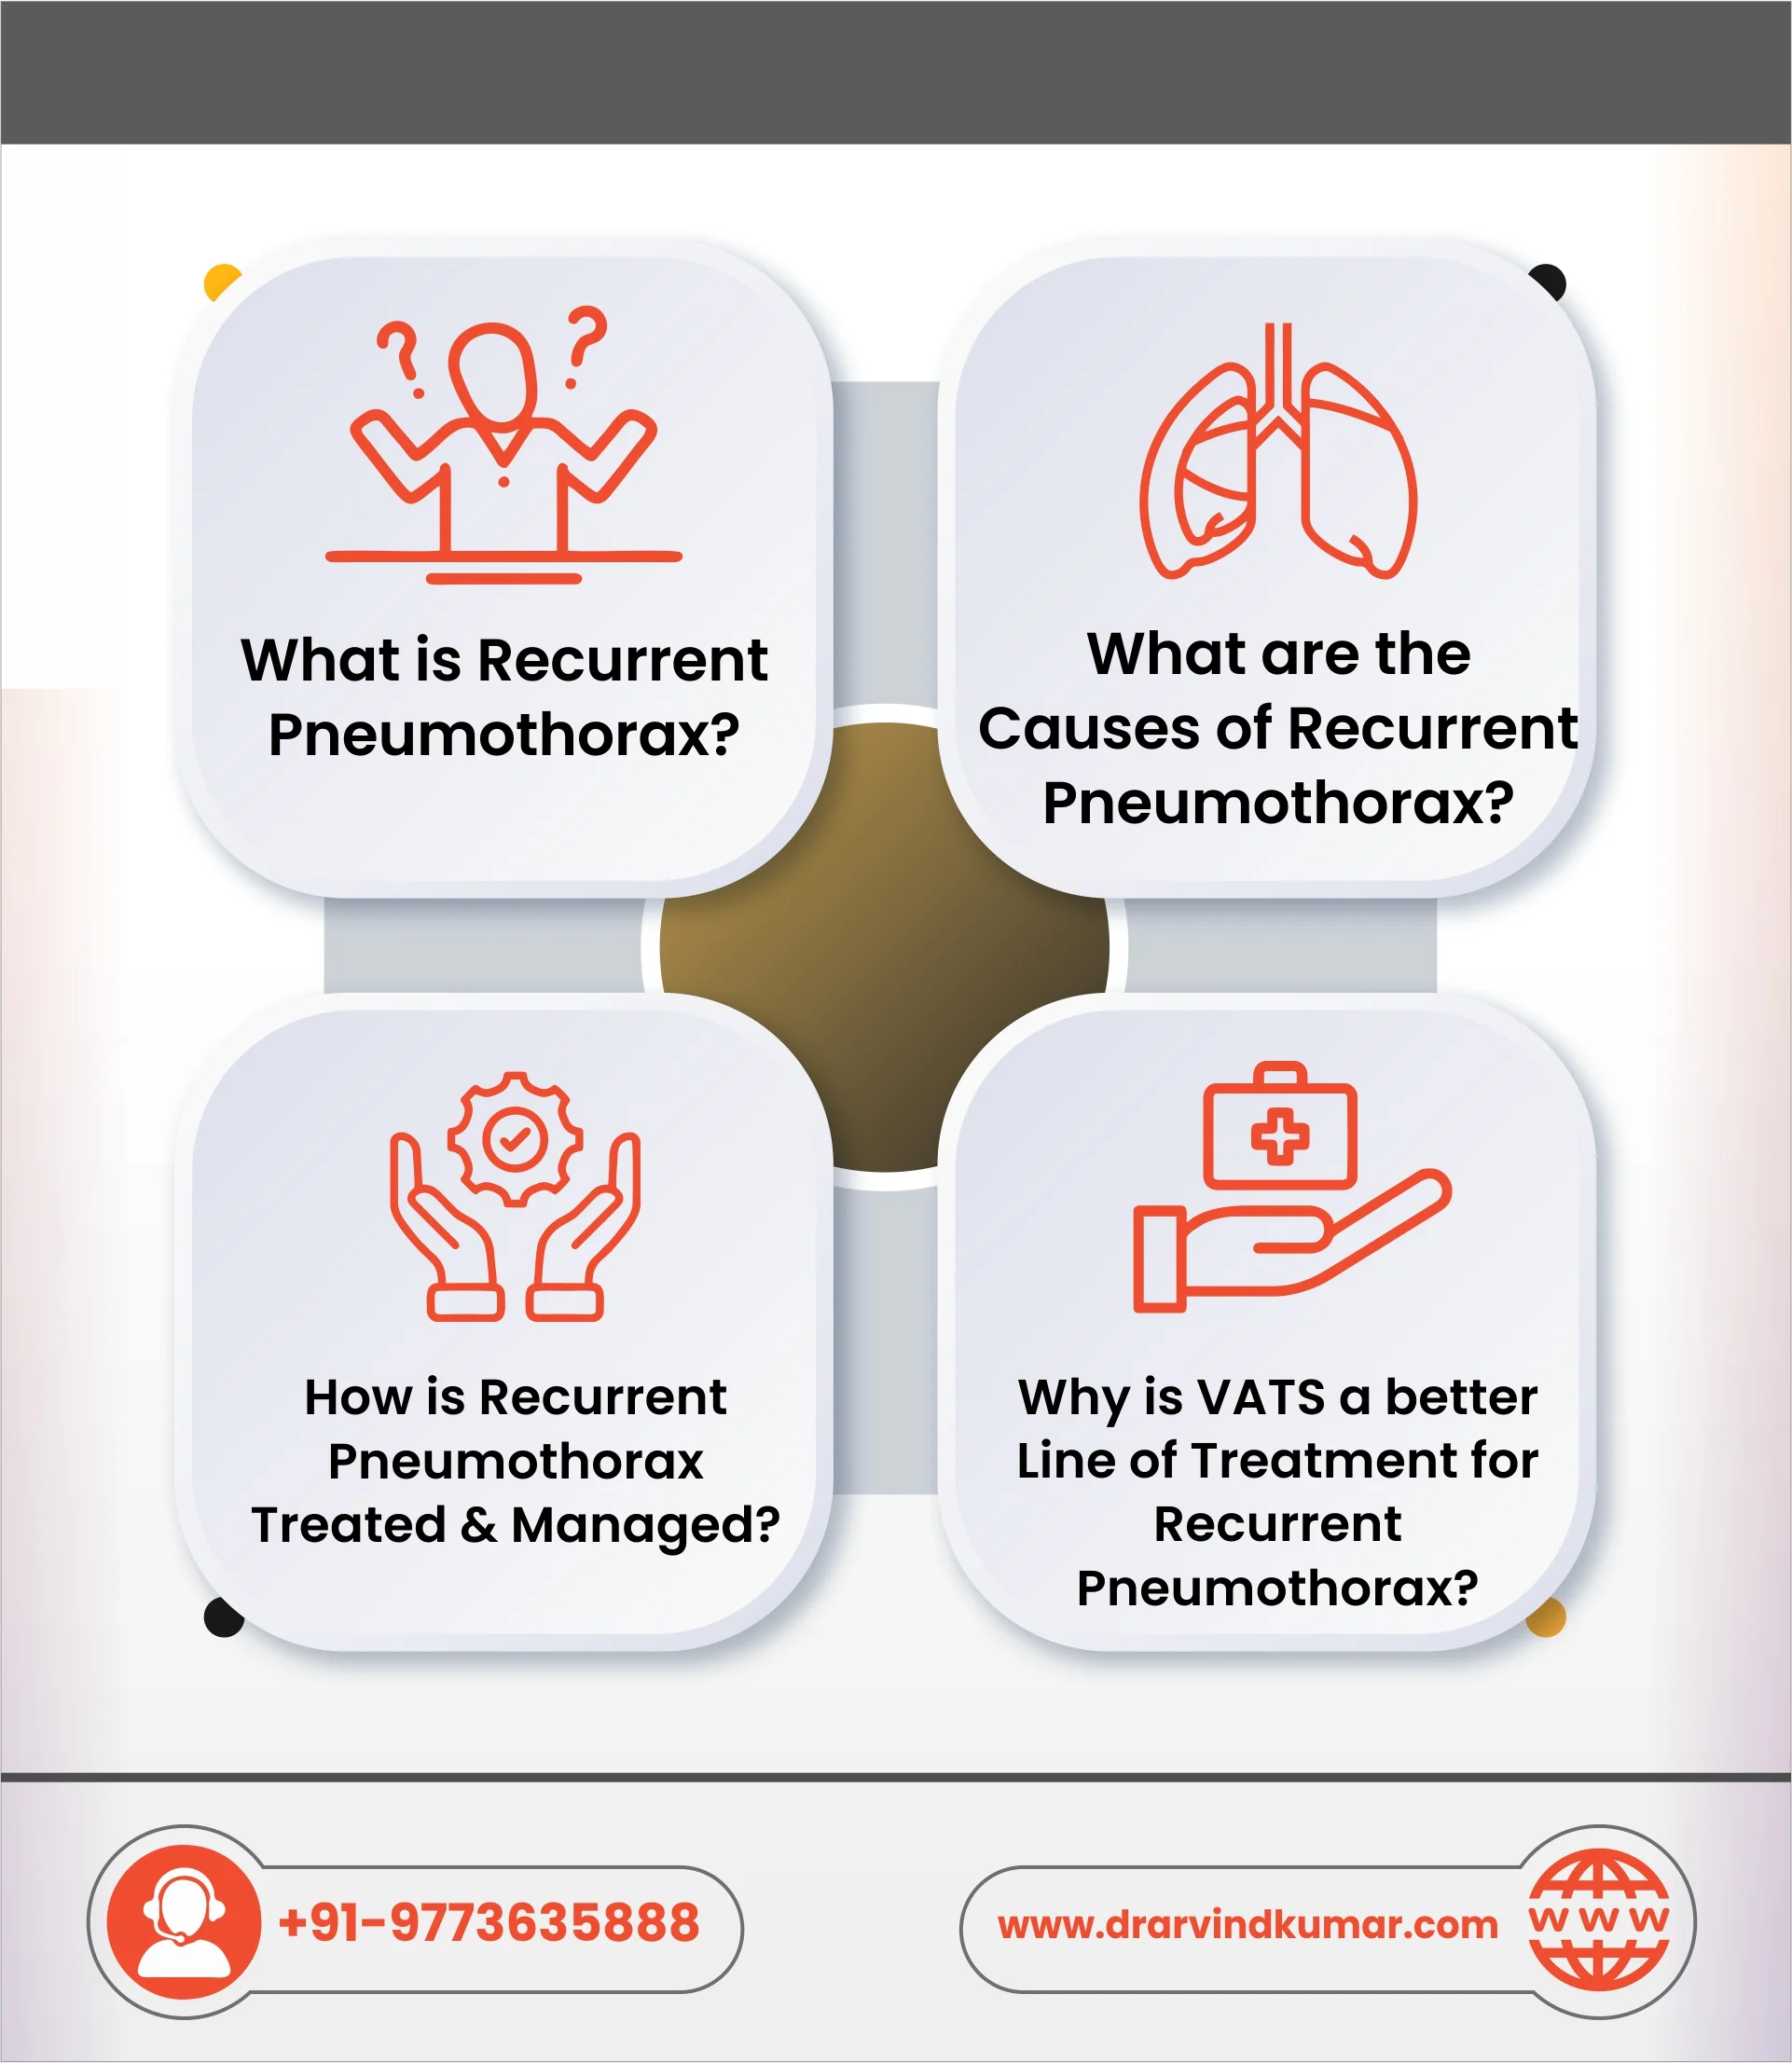 Recurrent Pneumothorax: Causes, Prevention, and Management